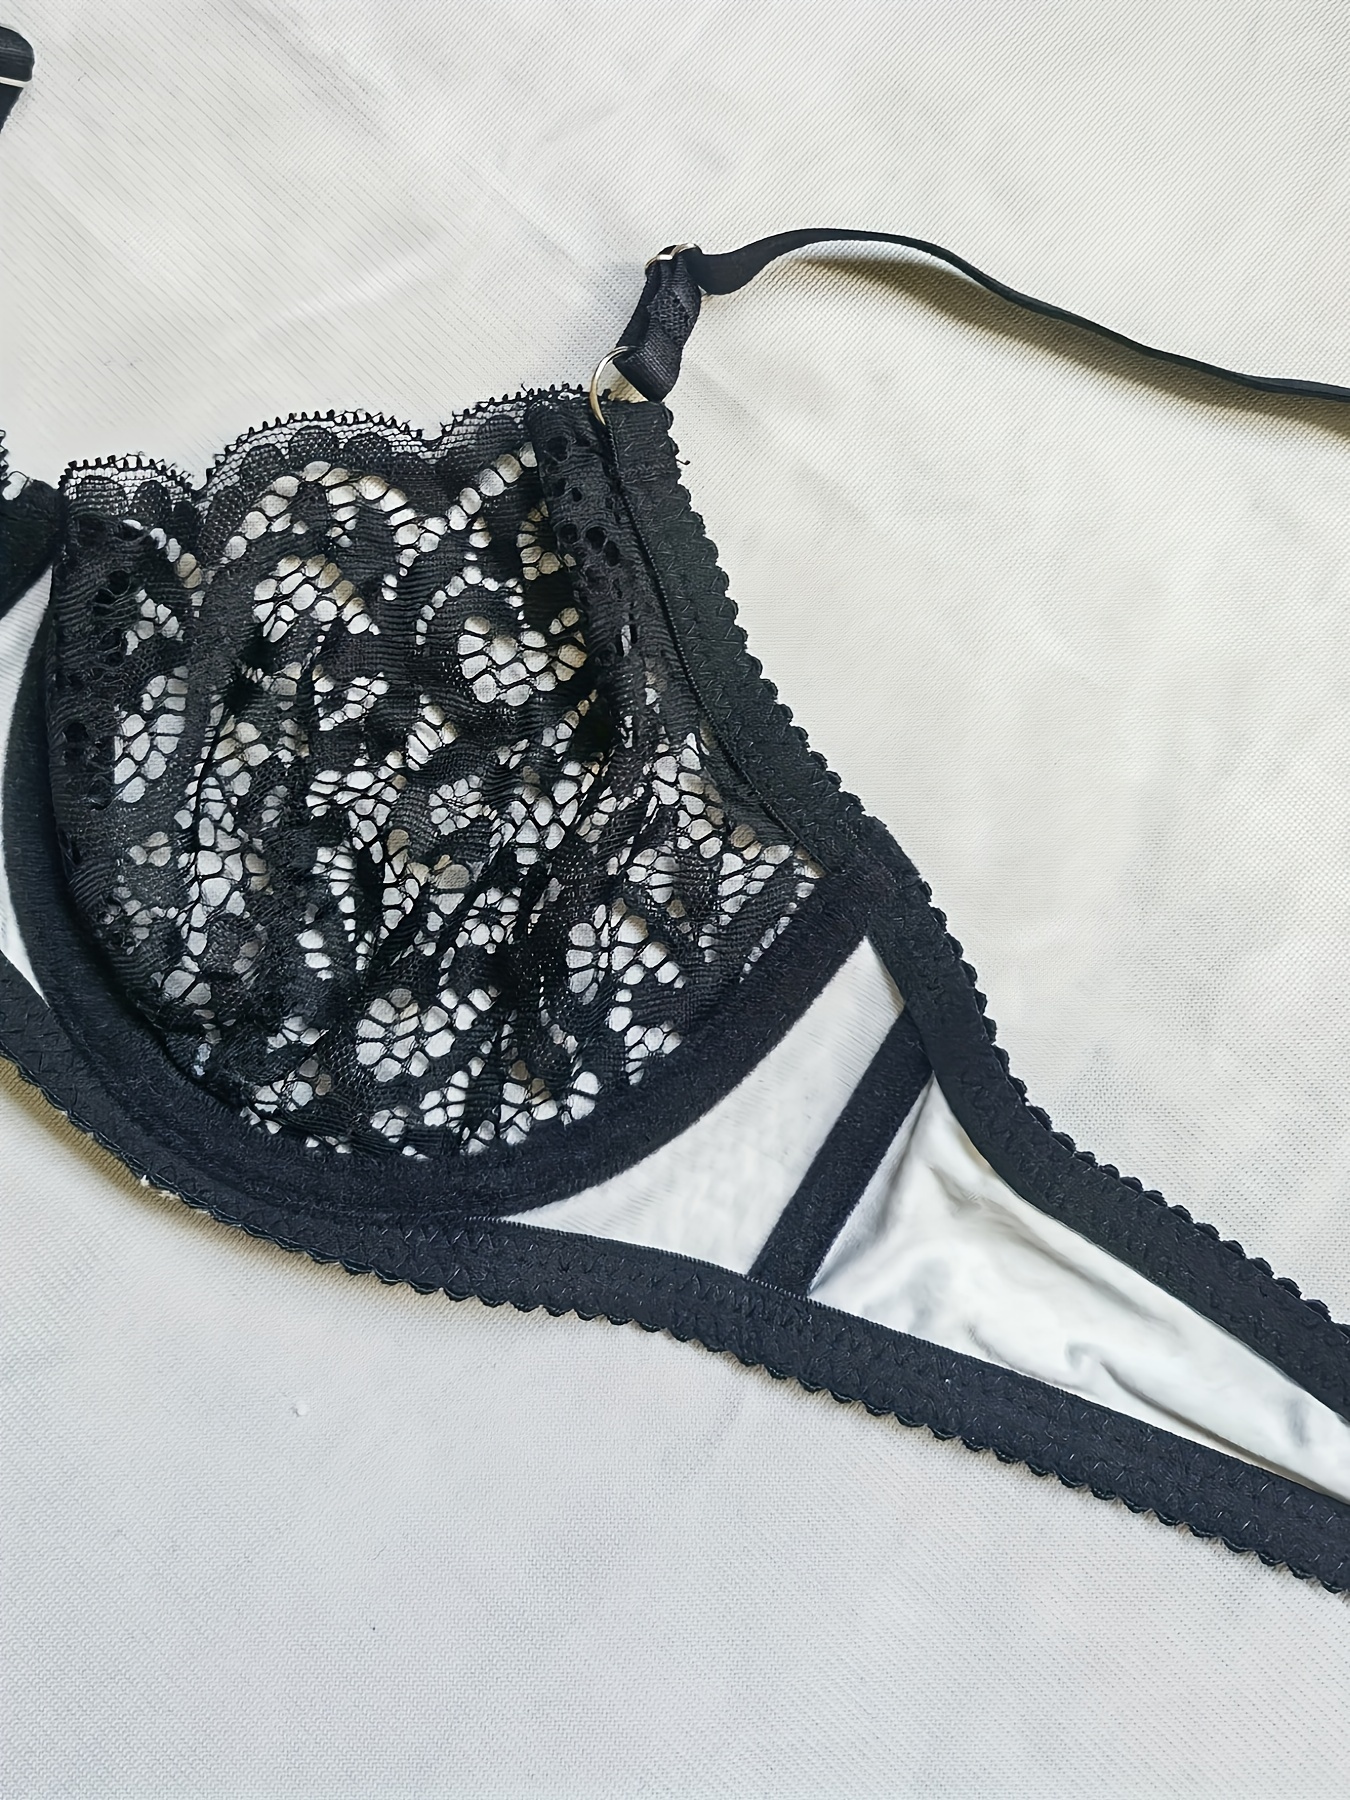 Make Some Lace Scalloped Bralette and Panty Set